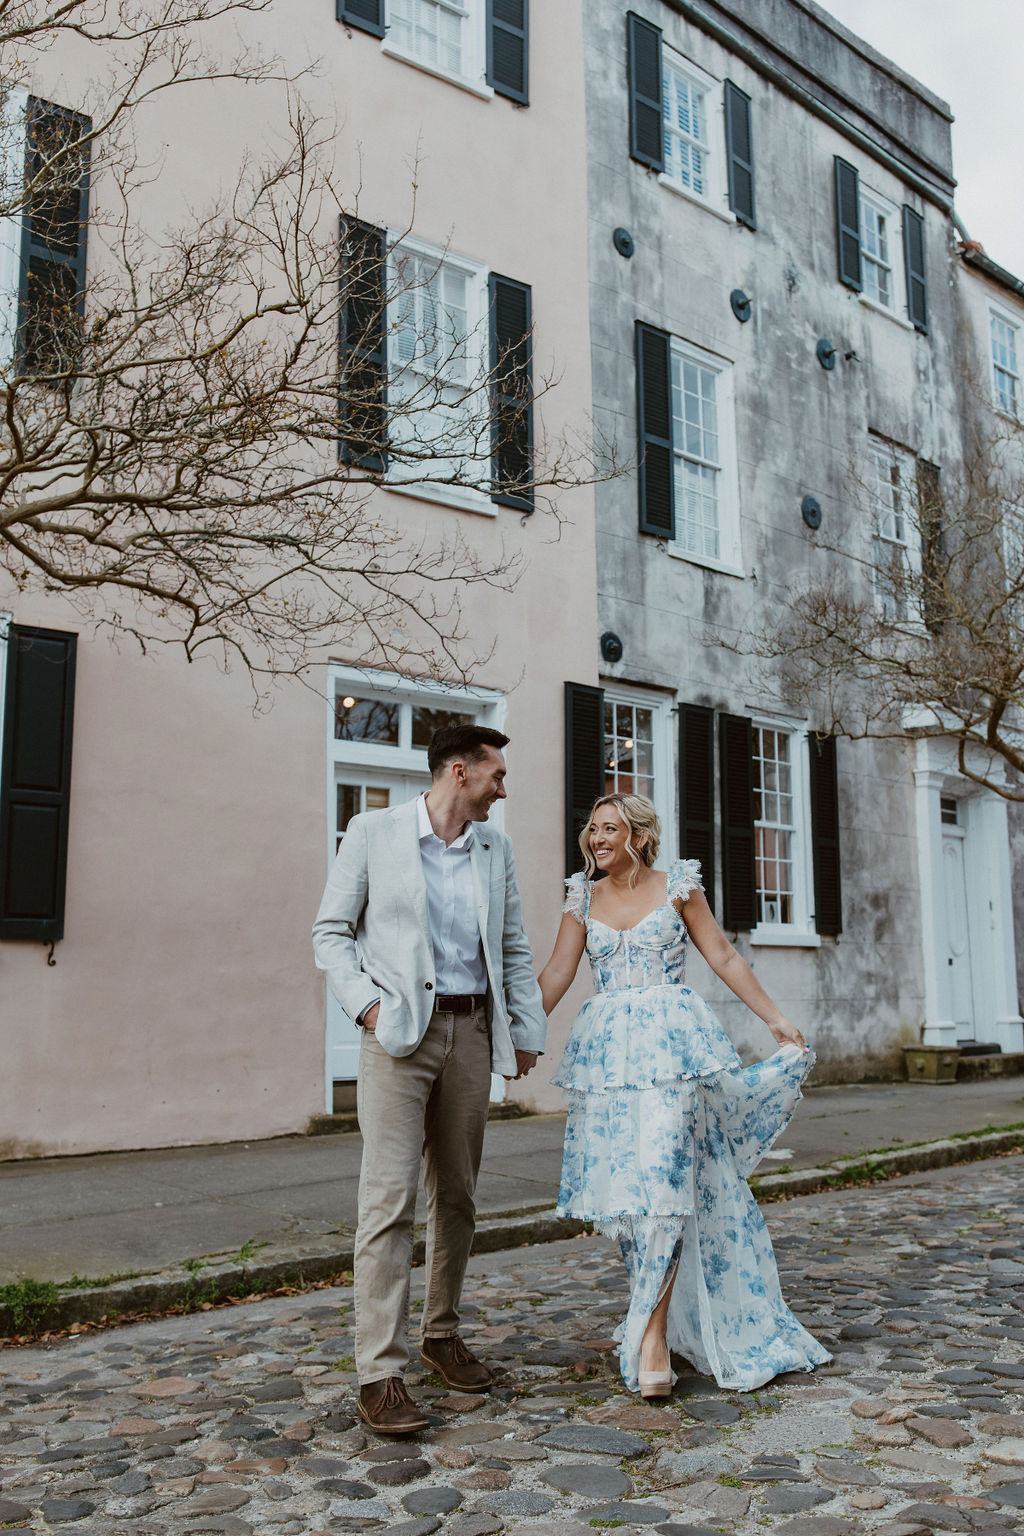 Why Locations Matter For Your Wedding and Engagement Photos